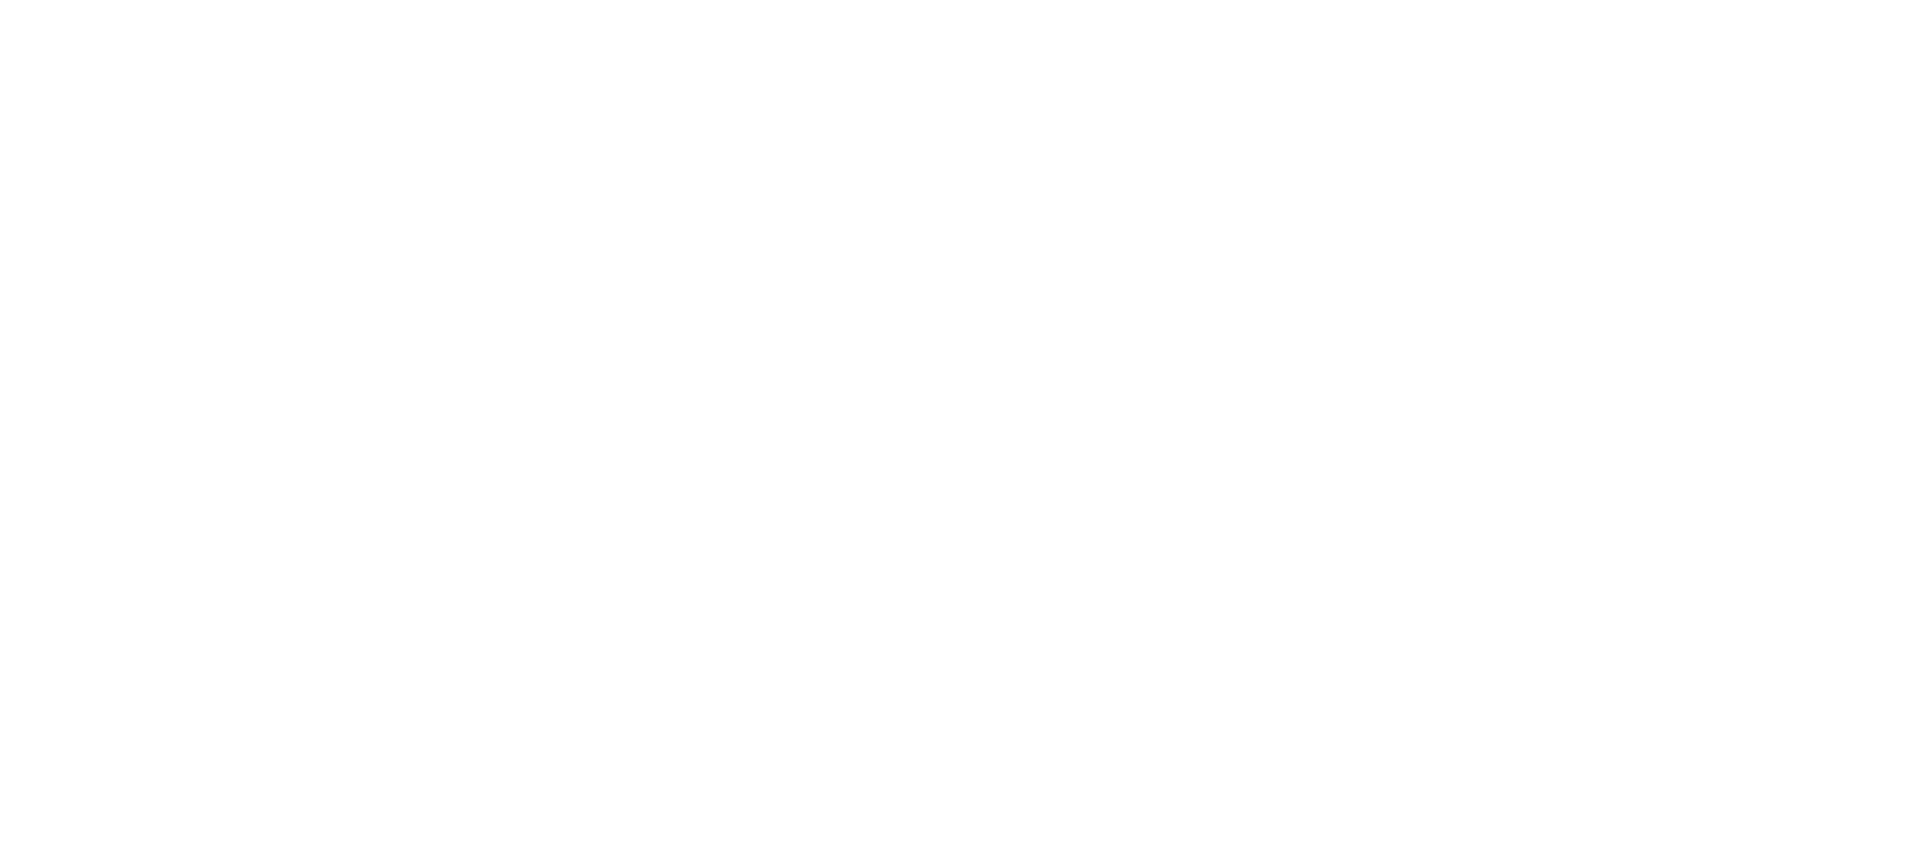 We’re not afraid of a challenge